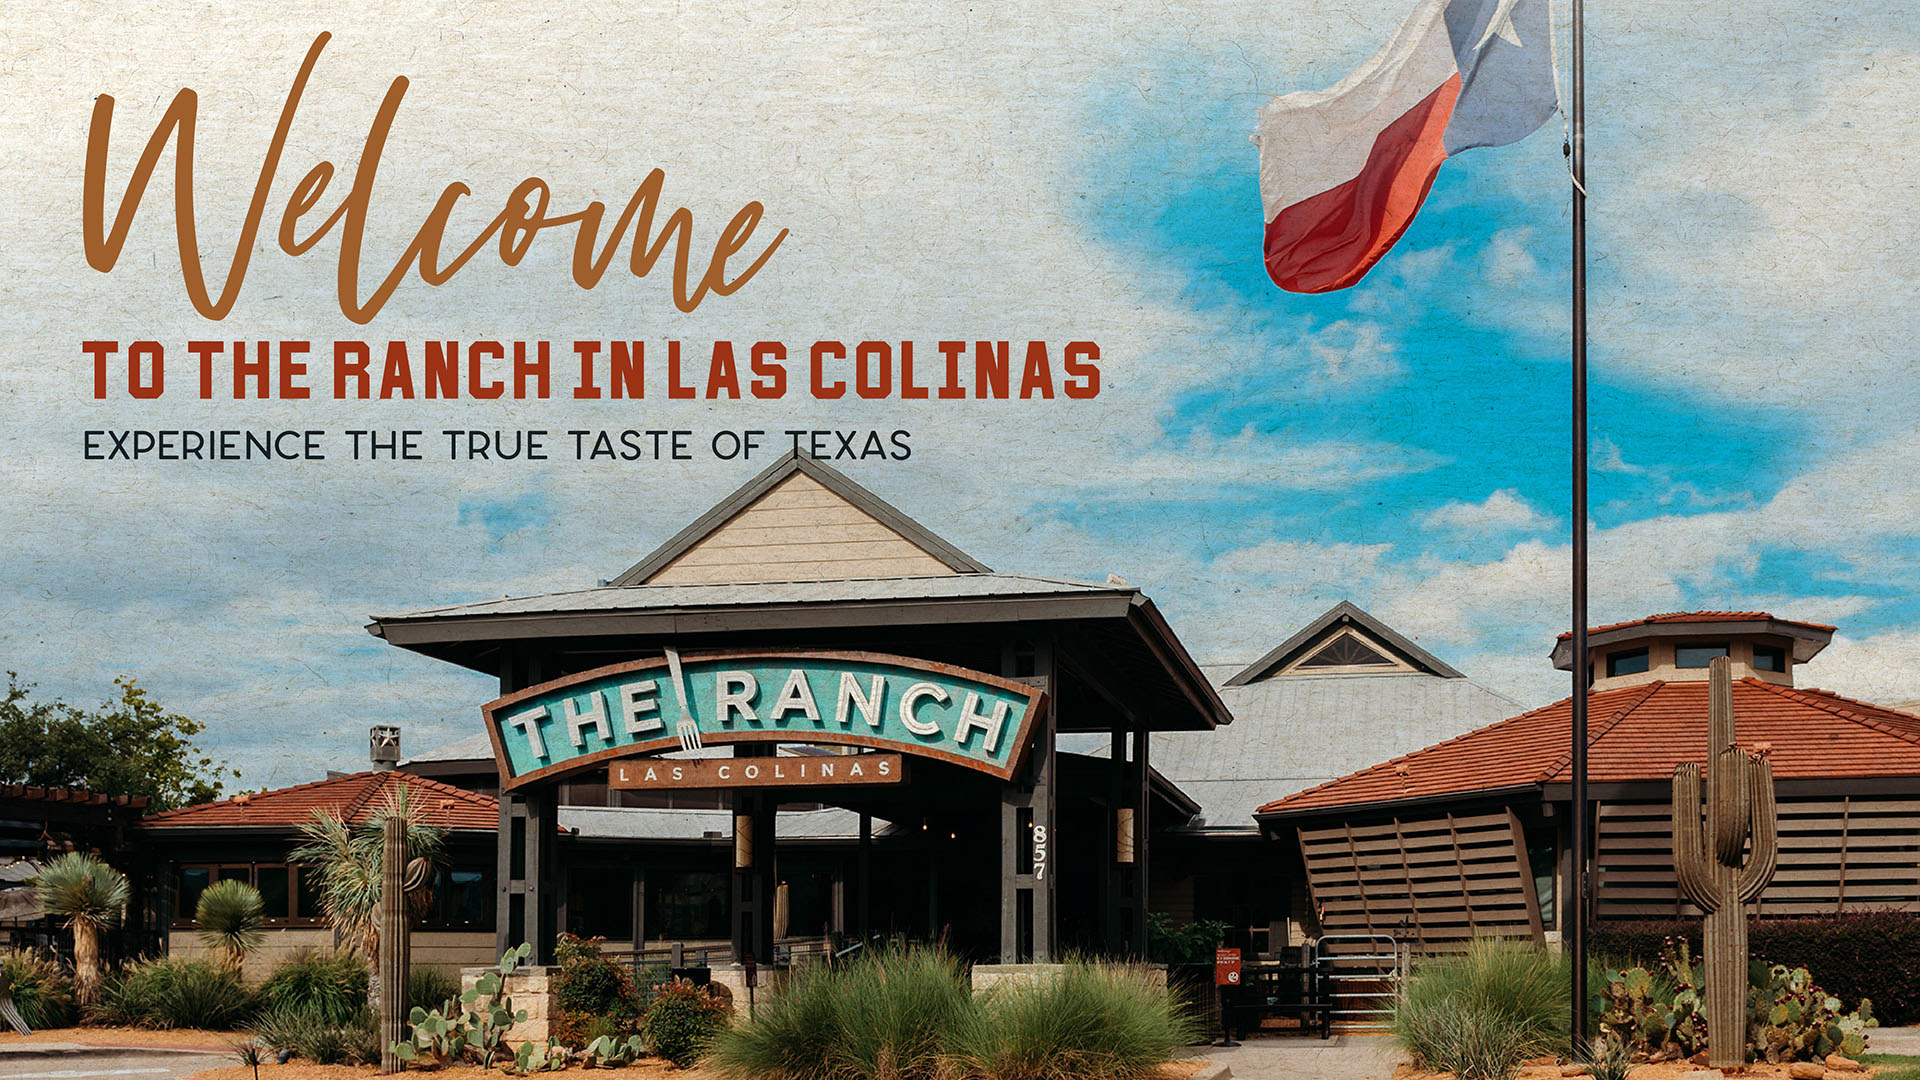 Welcome to The Ranch in Las Colinas